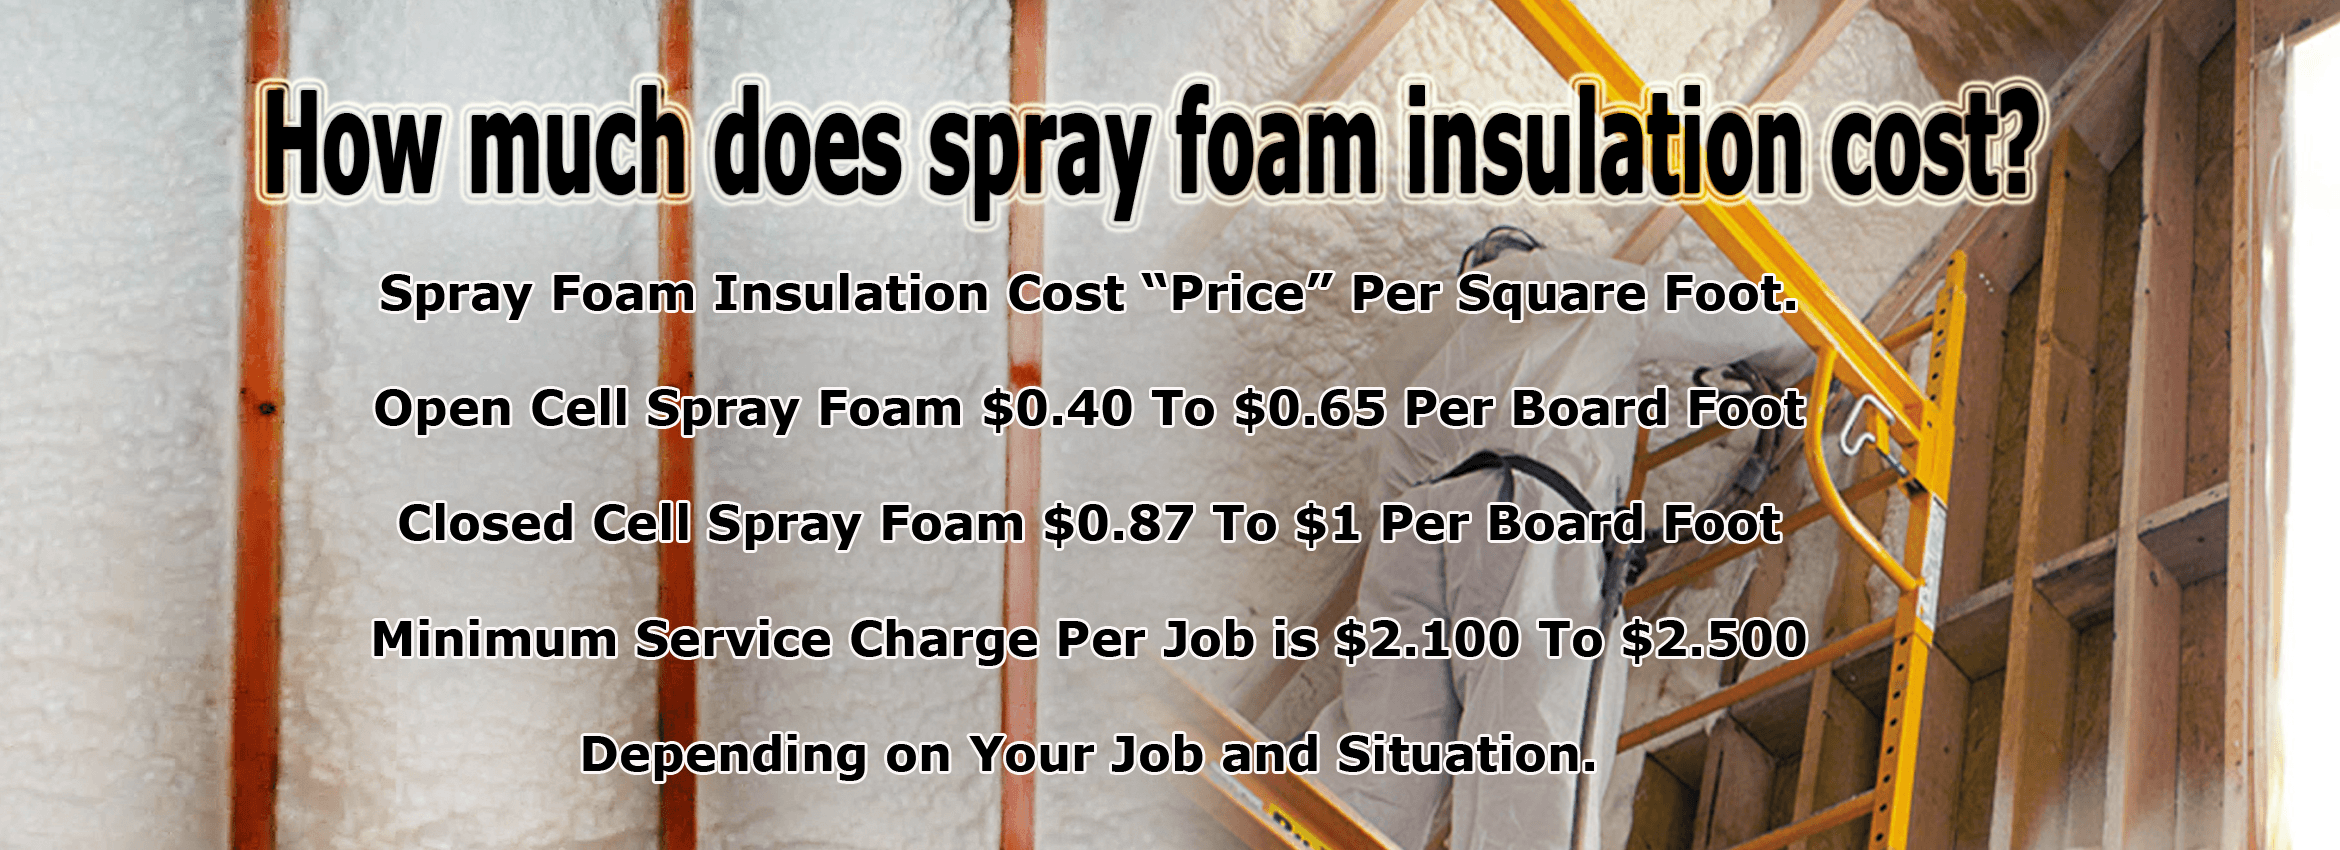 How-much-does-spray-foam-insulation-cost Insulation Contractors NYC - Brooklyn, Queens, Staten Island